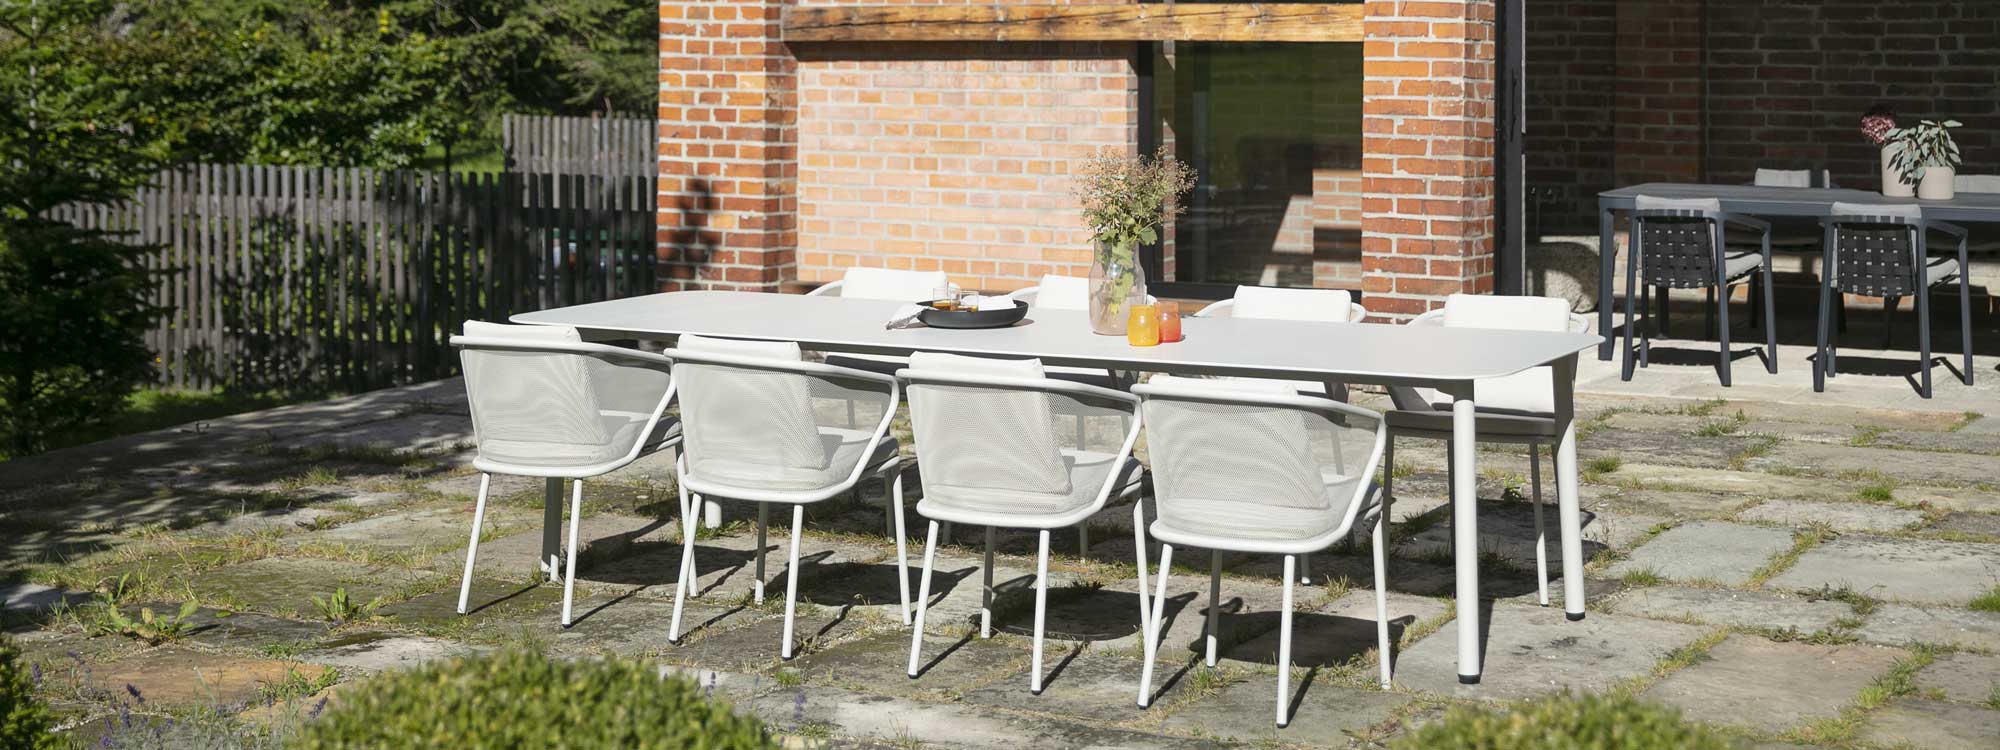 Image of Starling white garden table and Condor modern garden chairs by Studio Segers for Todus